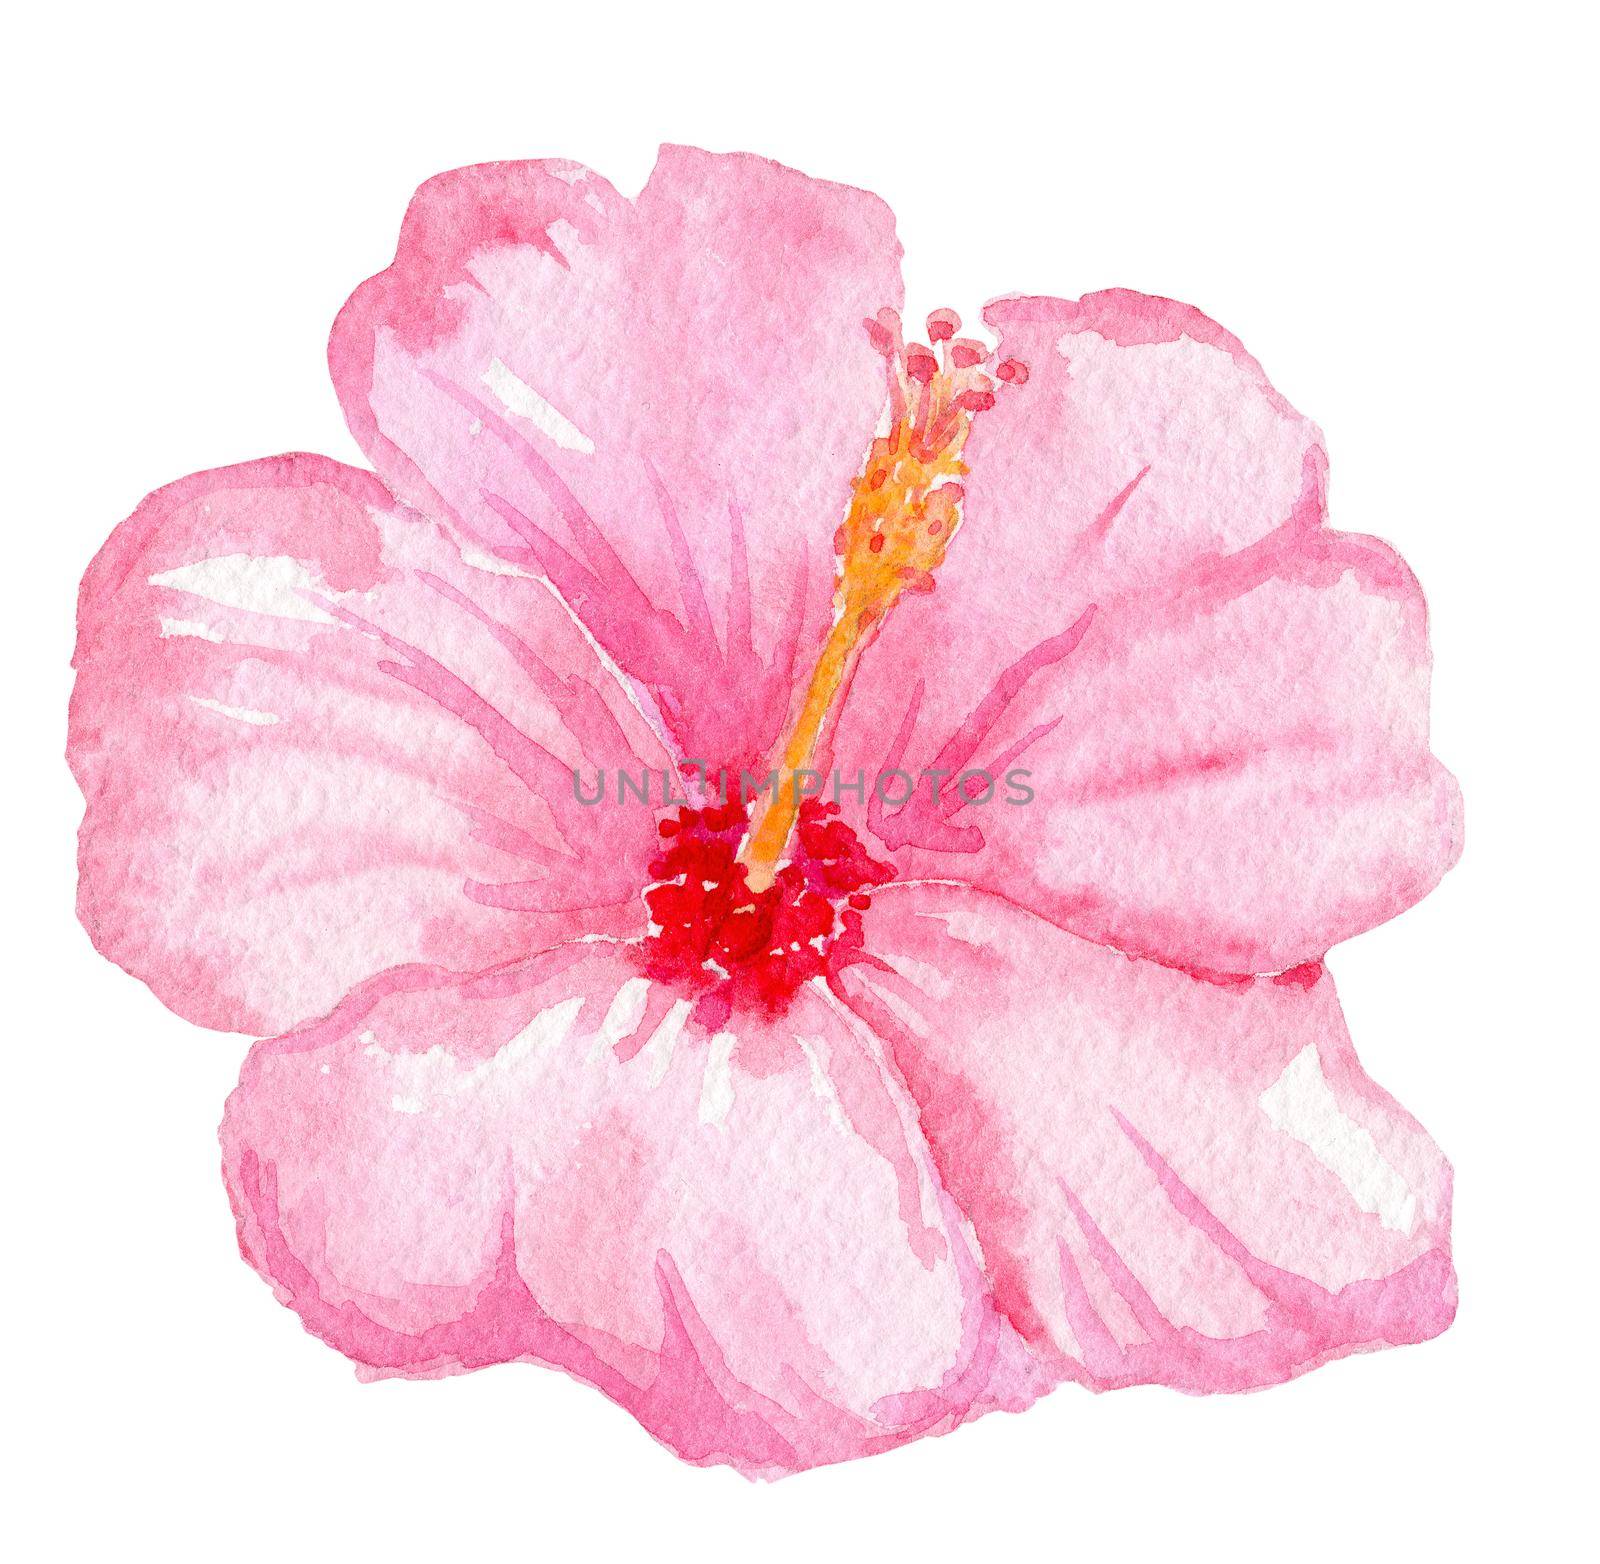 watercolor hand drawn pink hibiscus flower isolated on white background. Tropical flora by dreamloud